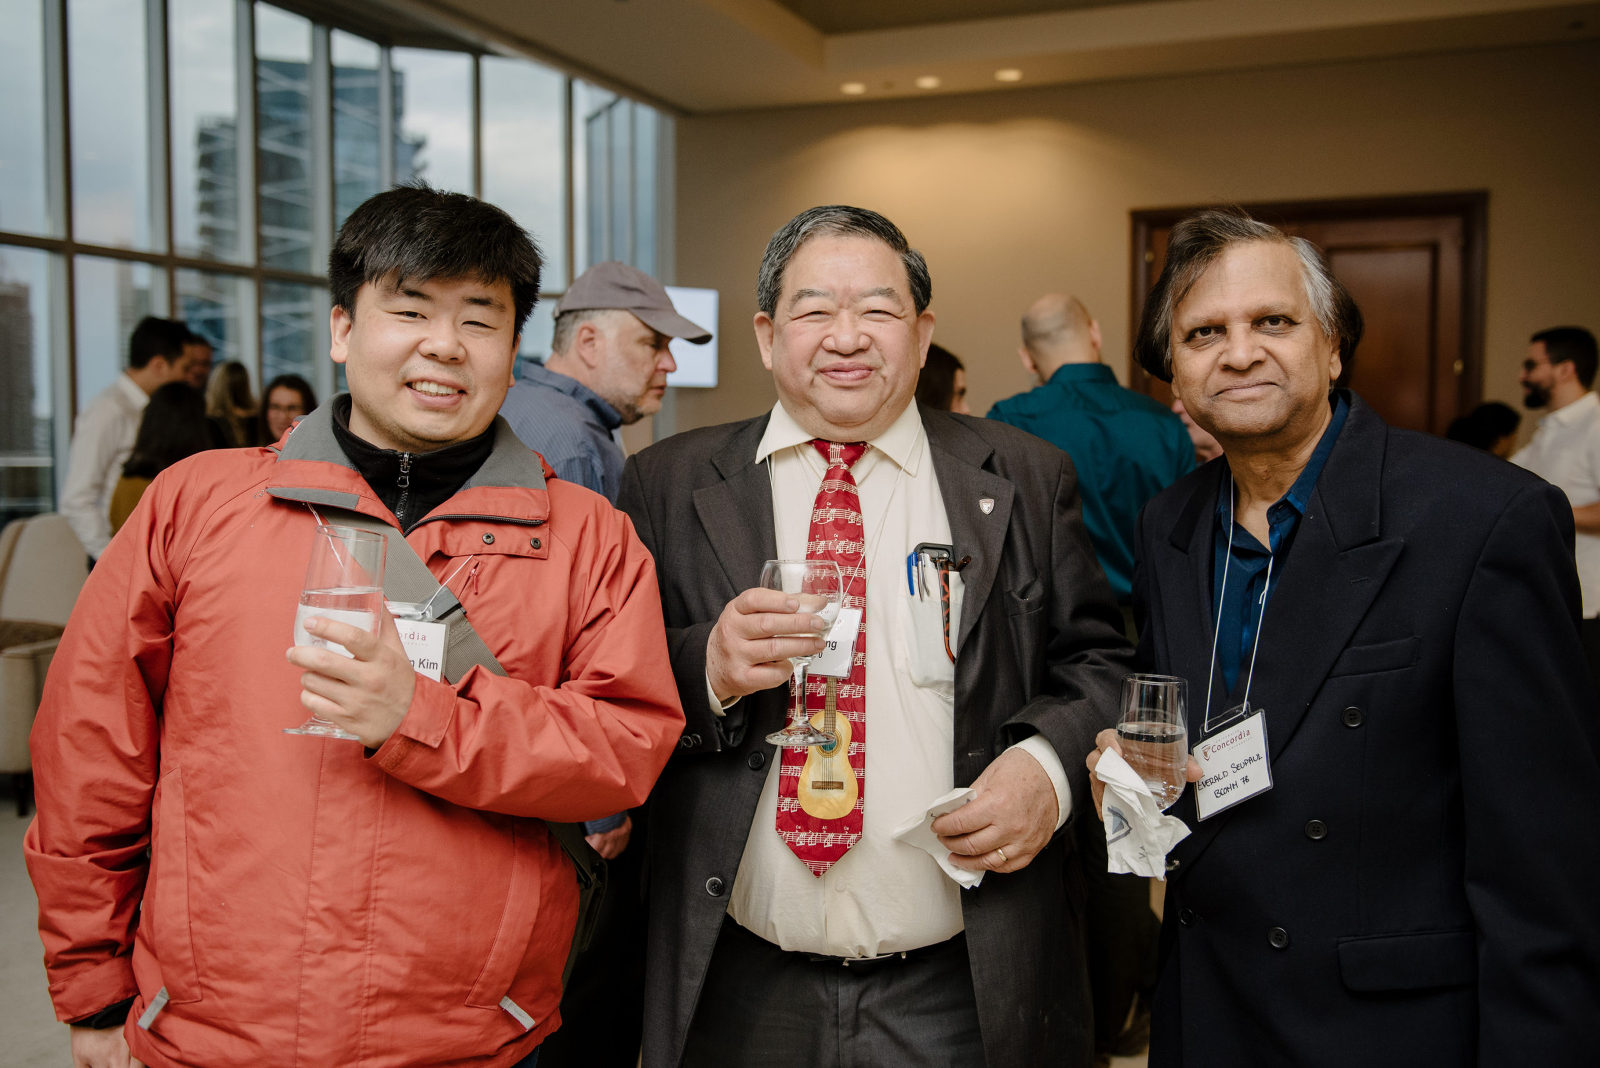 Colleagues from Concordia University gather at a corporate event in Toronto